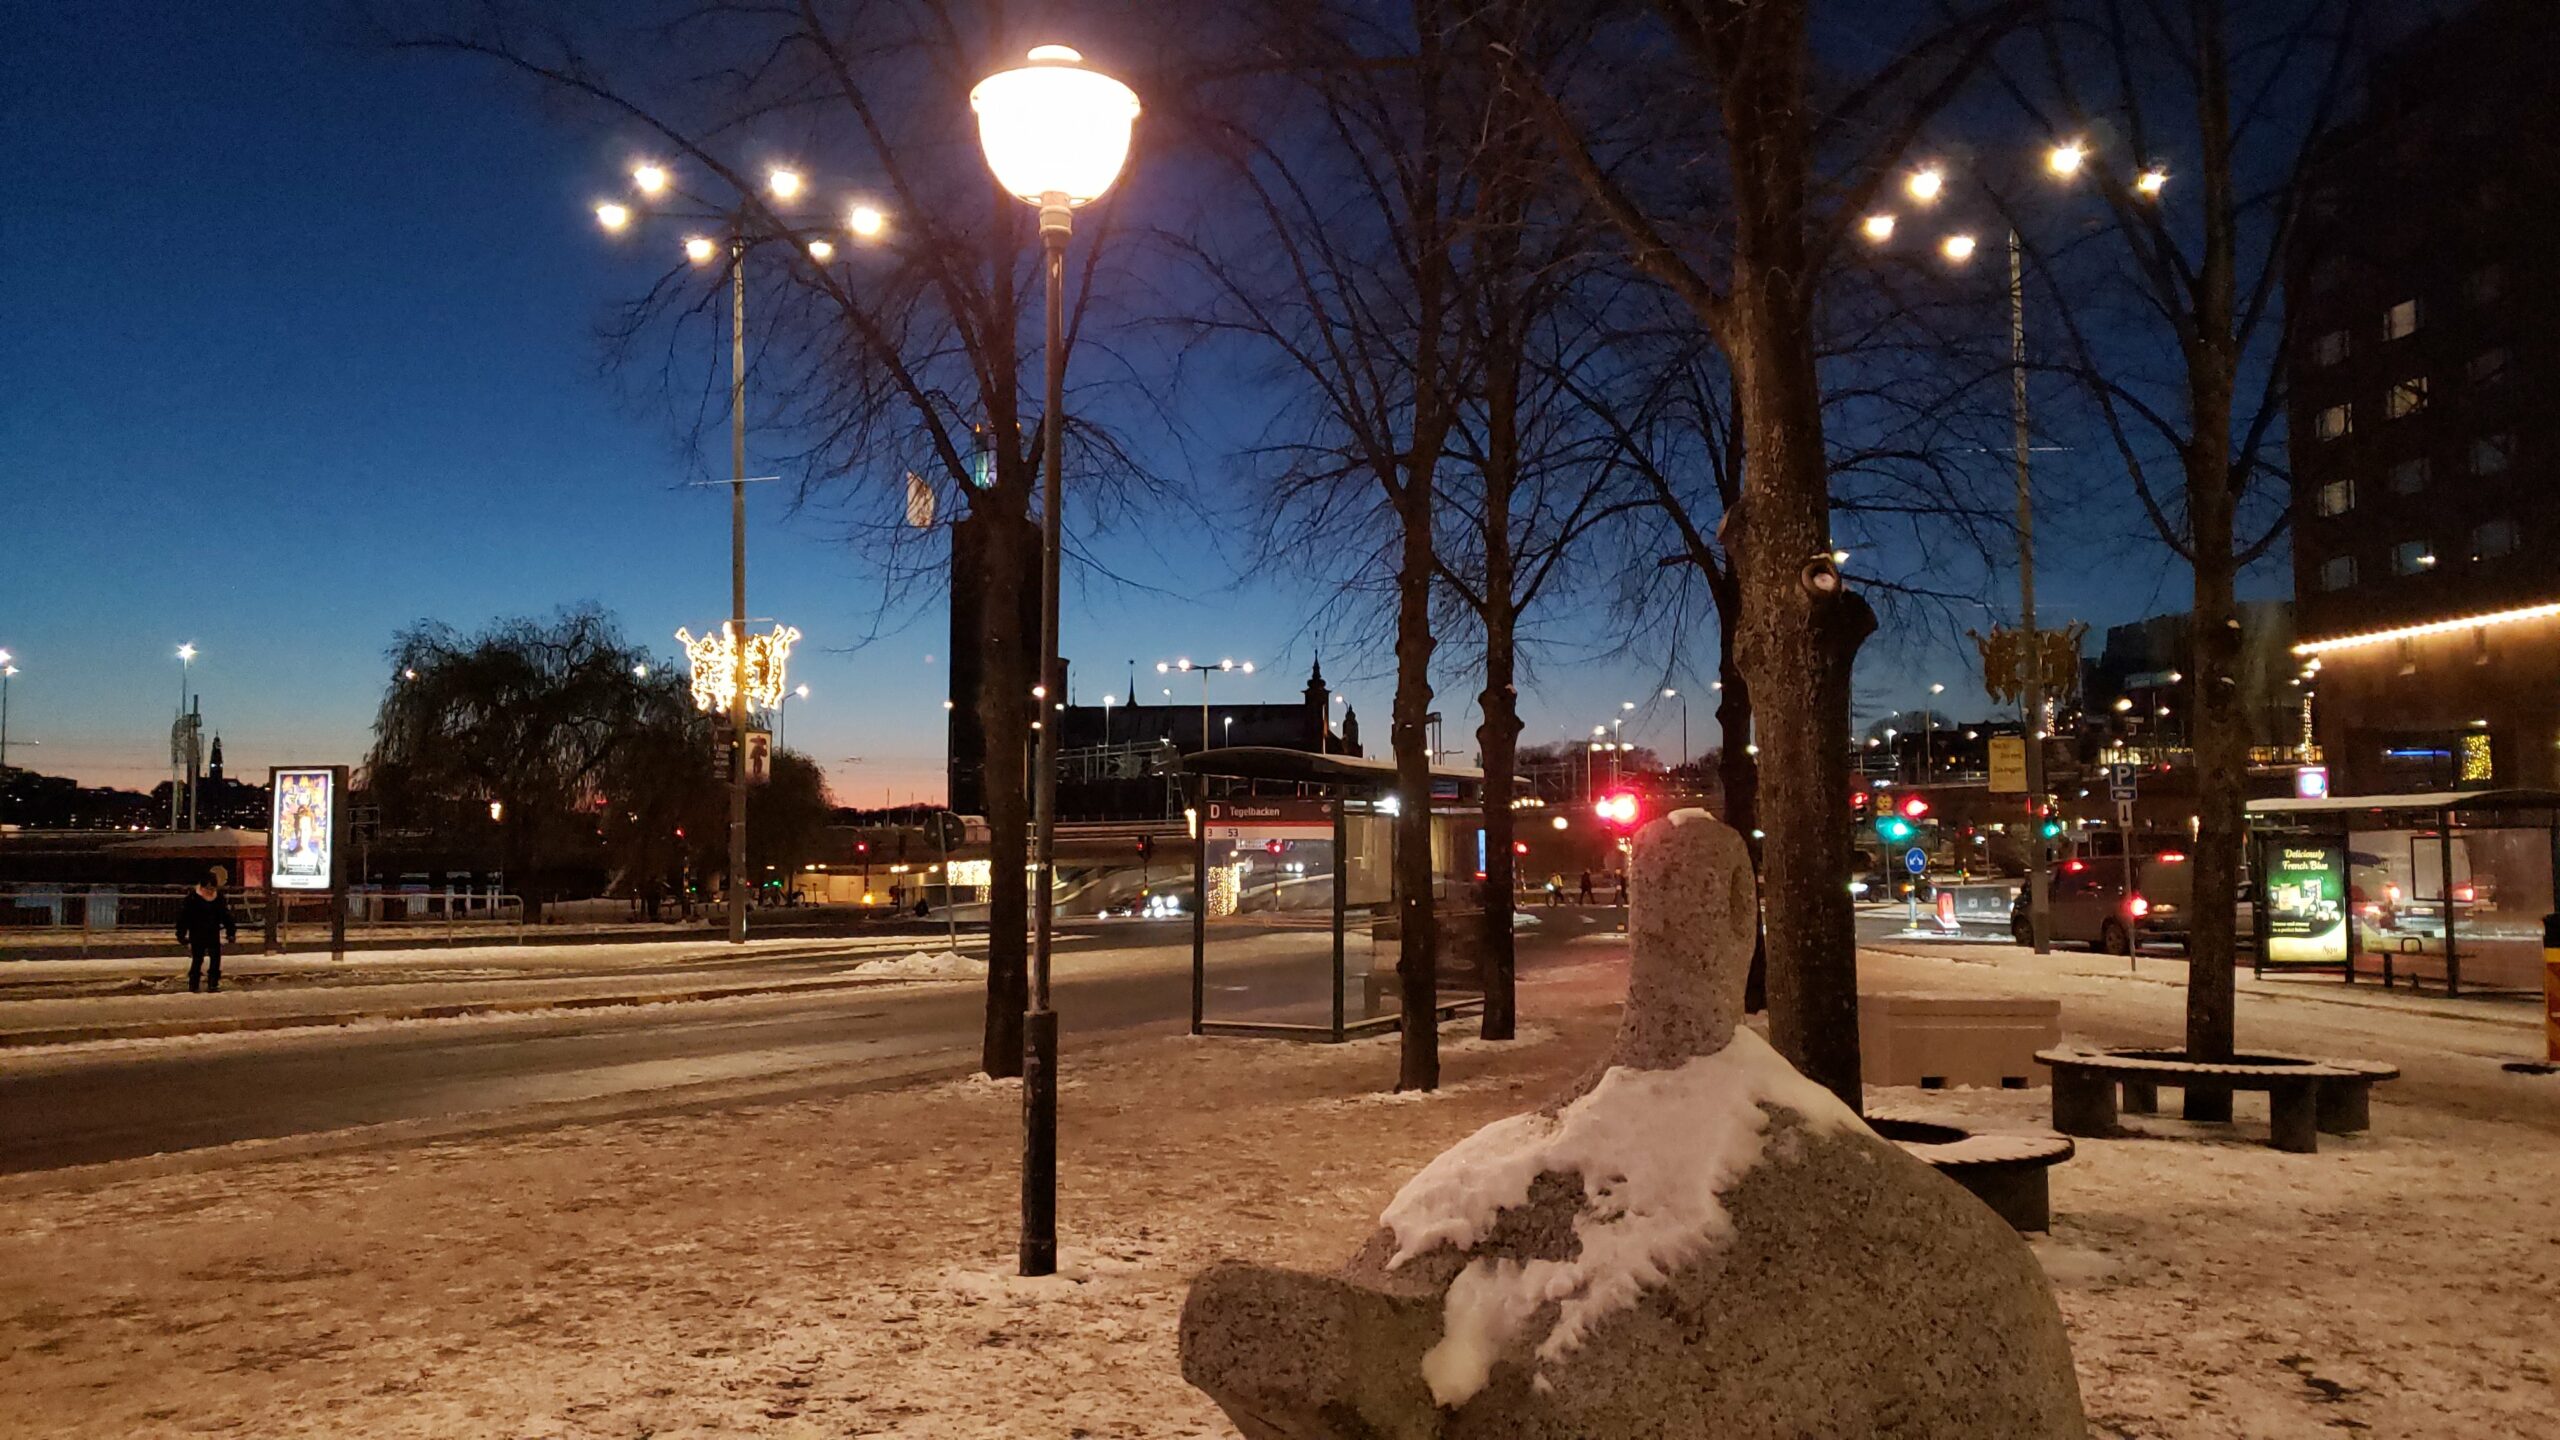 The splendid night lights in Stockholm amazes you in the winter.